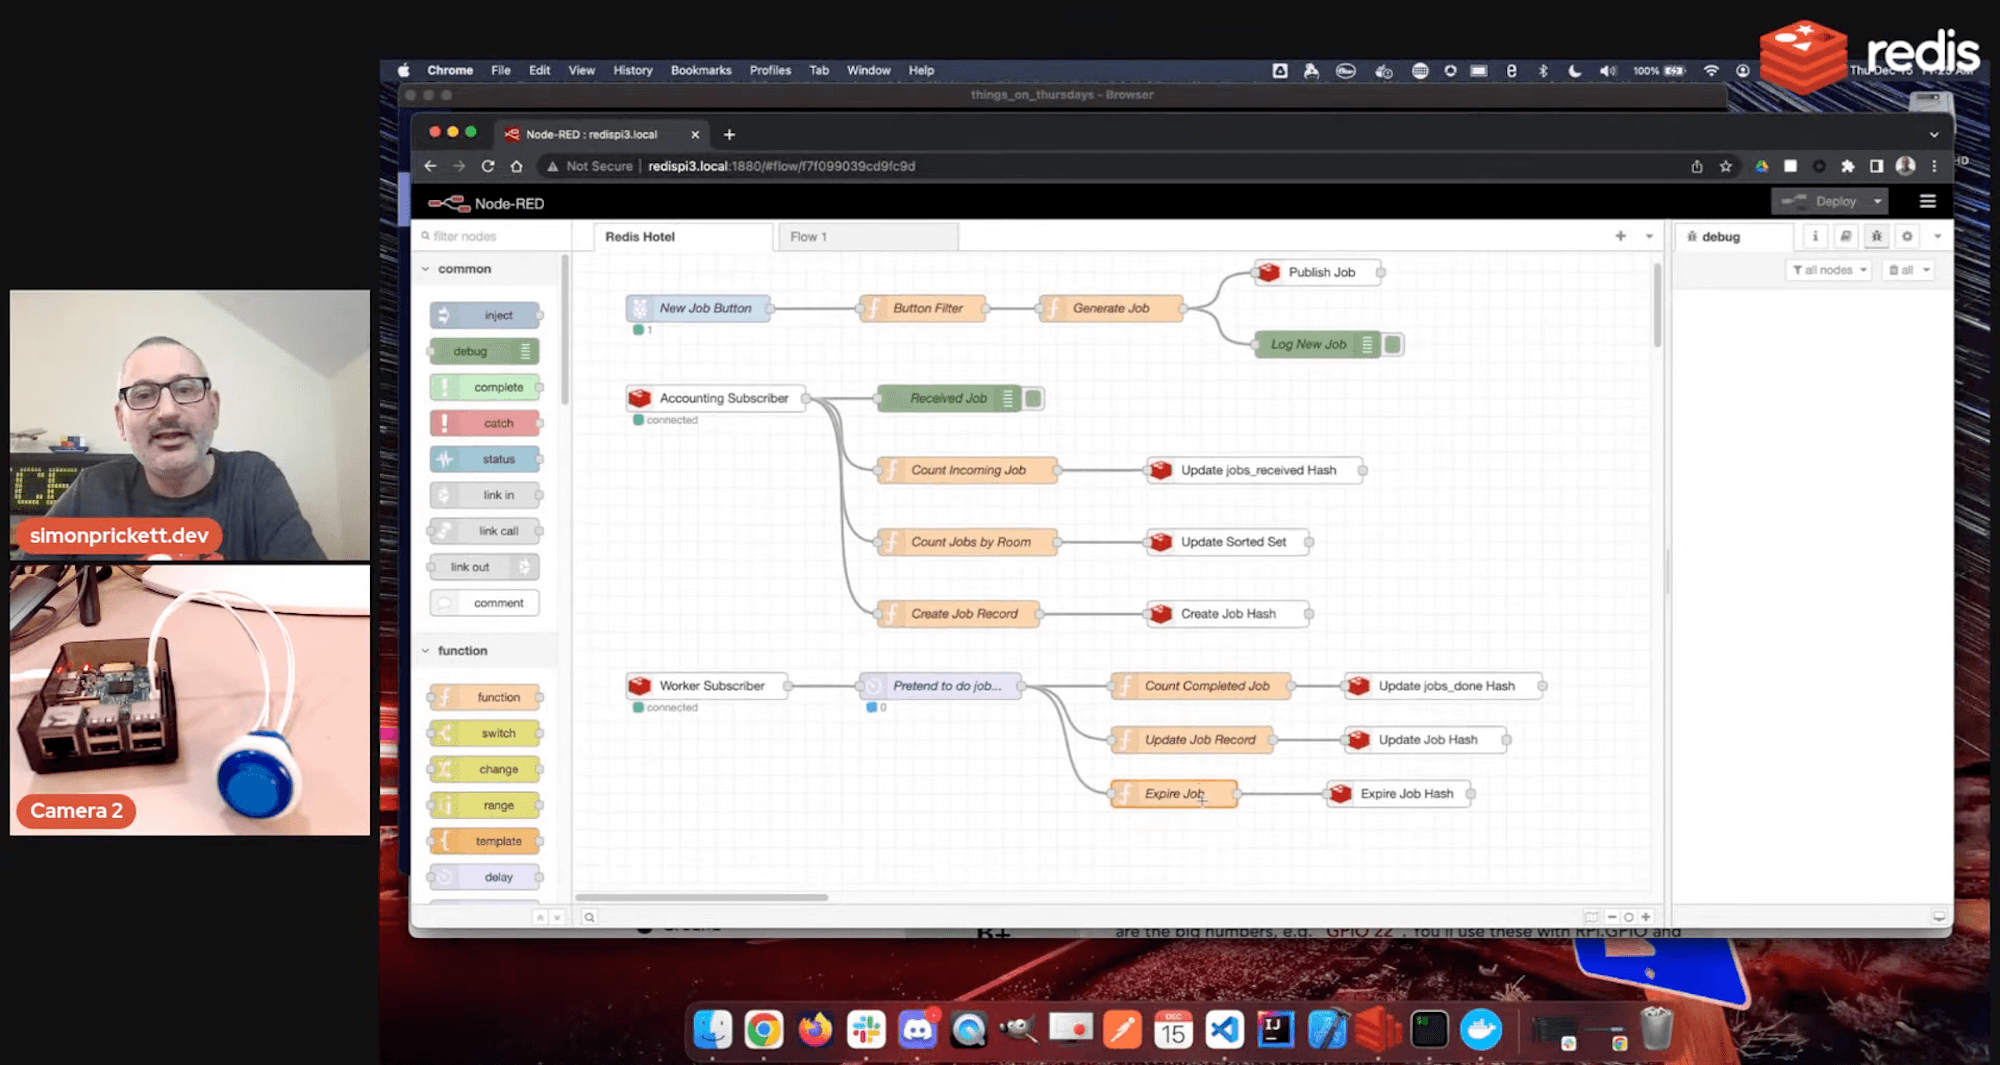 Screenshot from my live stream showing the Node RED project flow